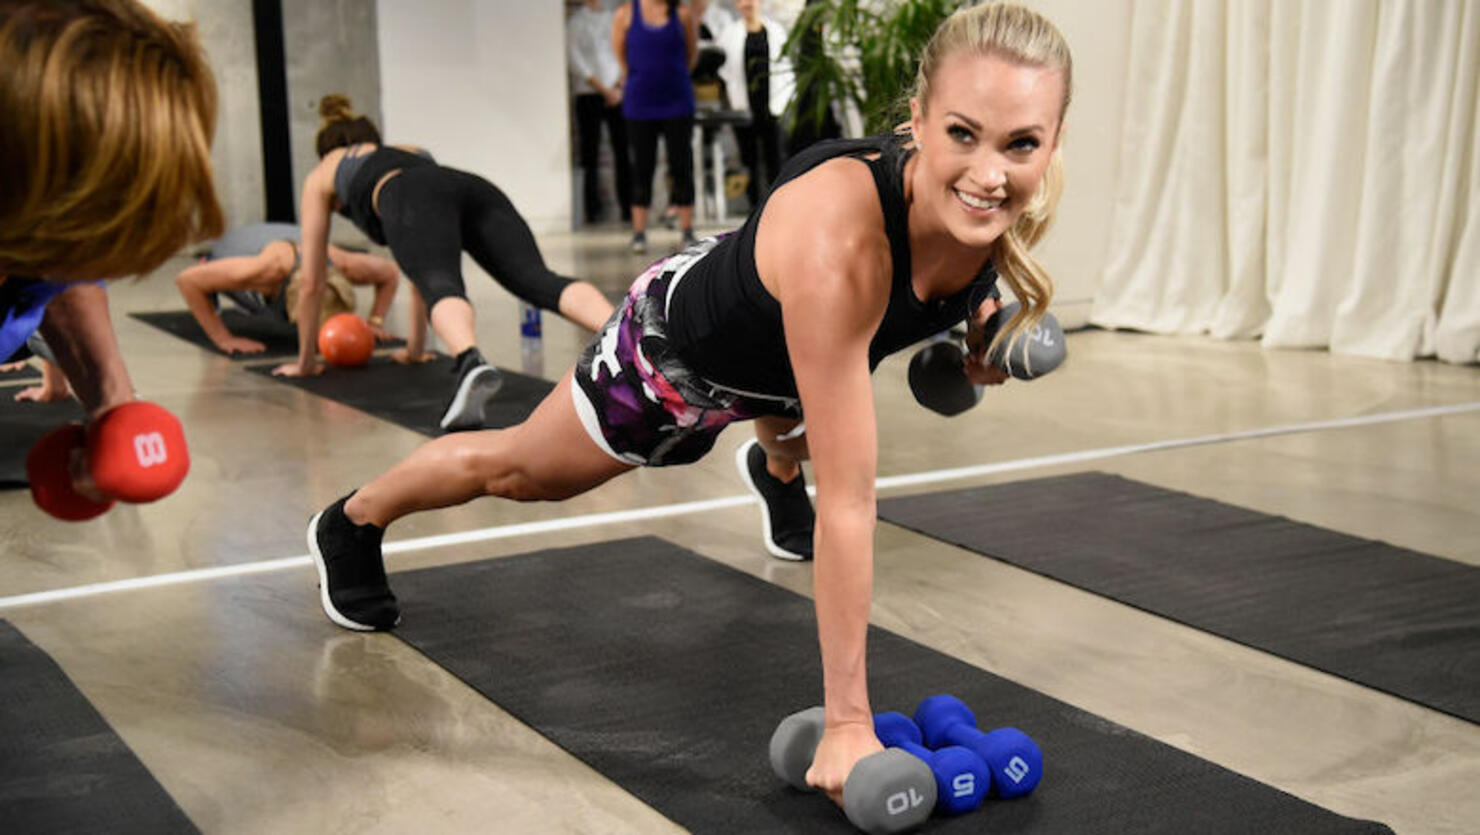 Carrie Underwood Says Cute Workout Clothes Give Her A 'Little